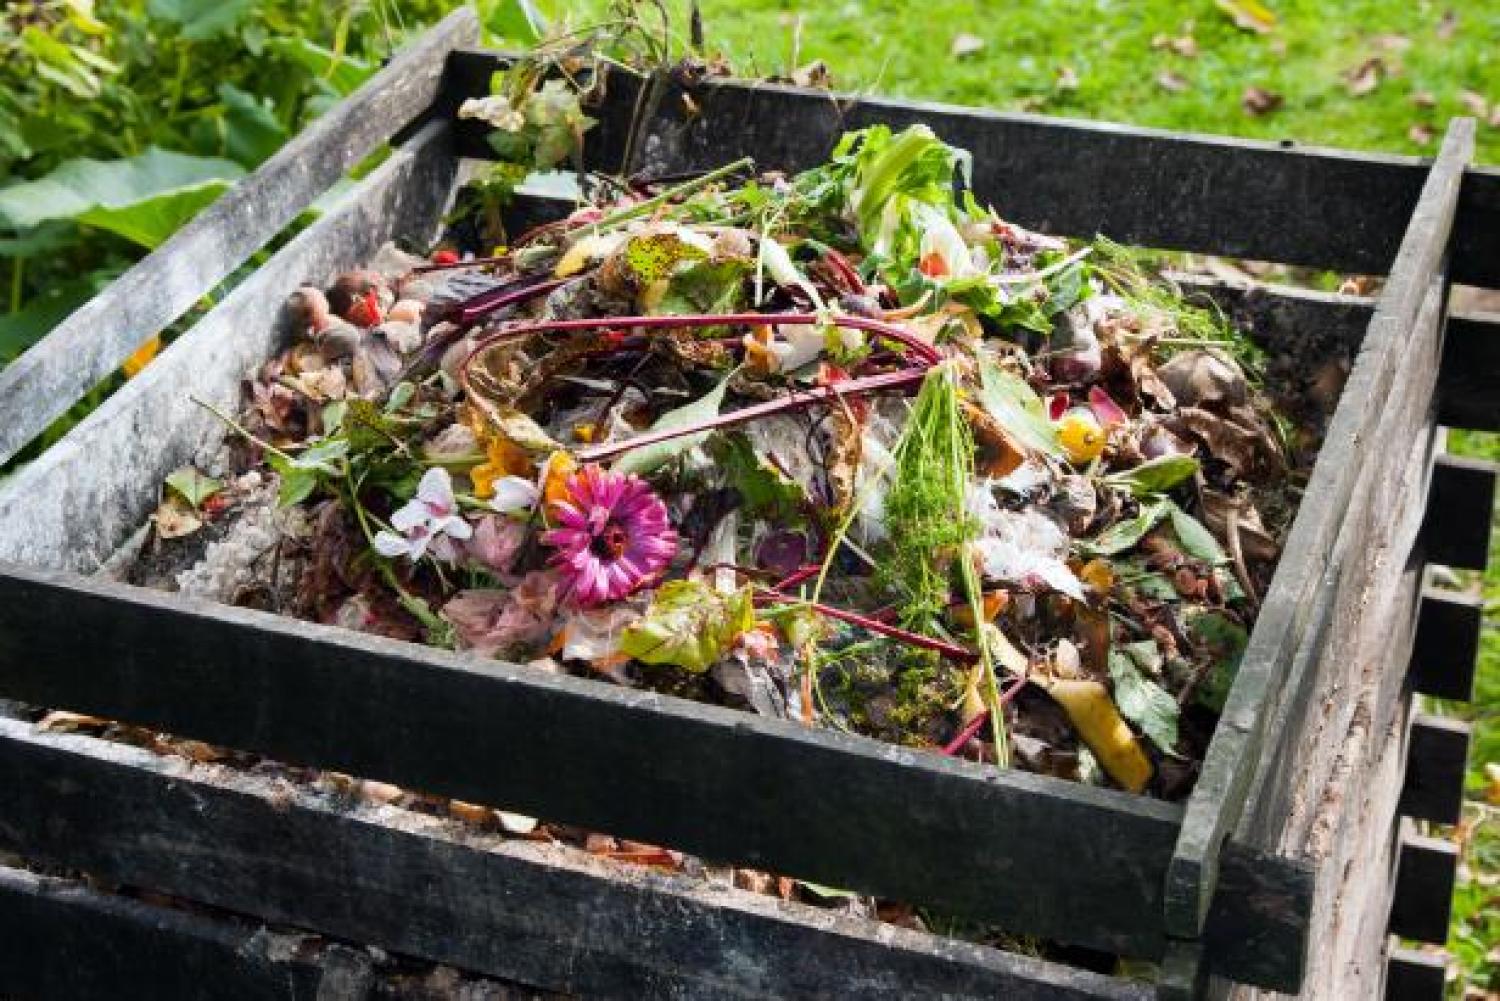 DIY Outdoor Compost Bin - How to Build a Compost Bin for Your Home